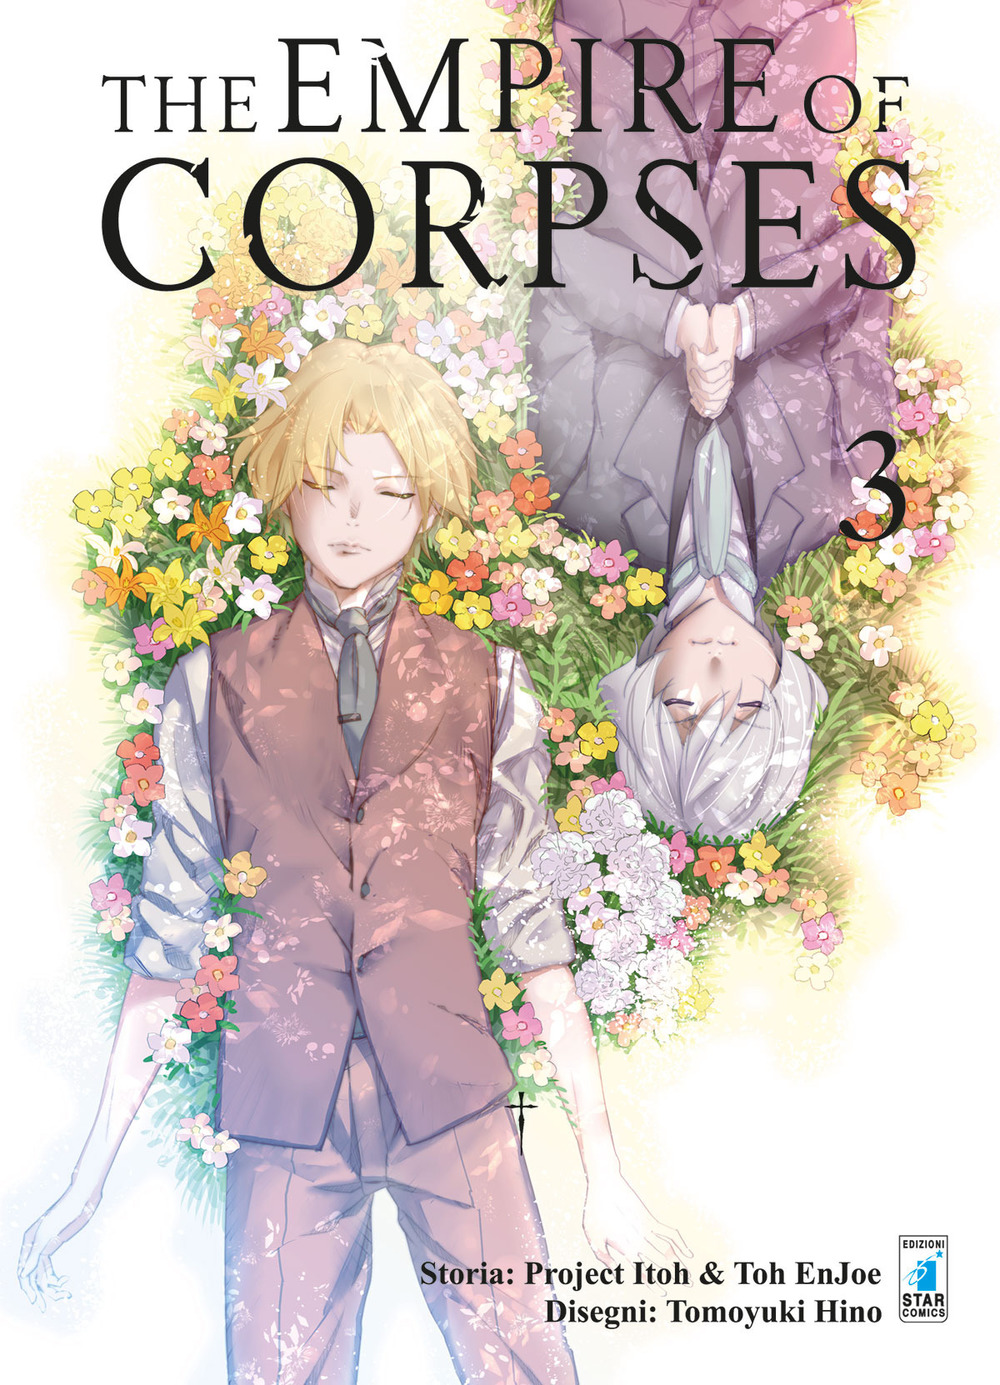 The empire of corpses. Vol. 3